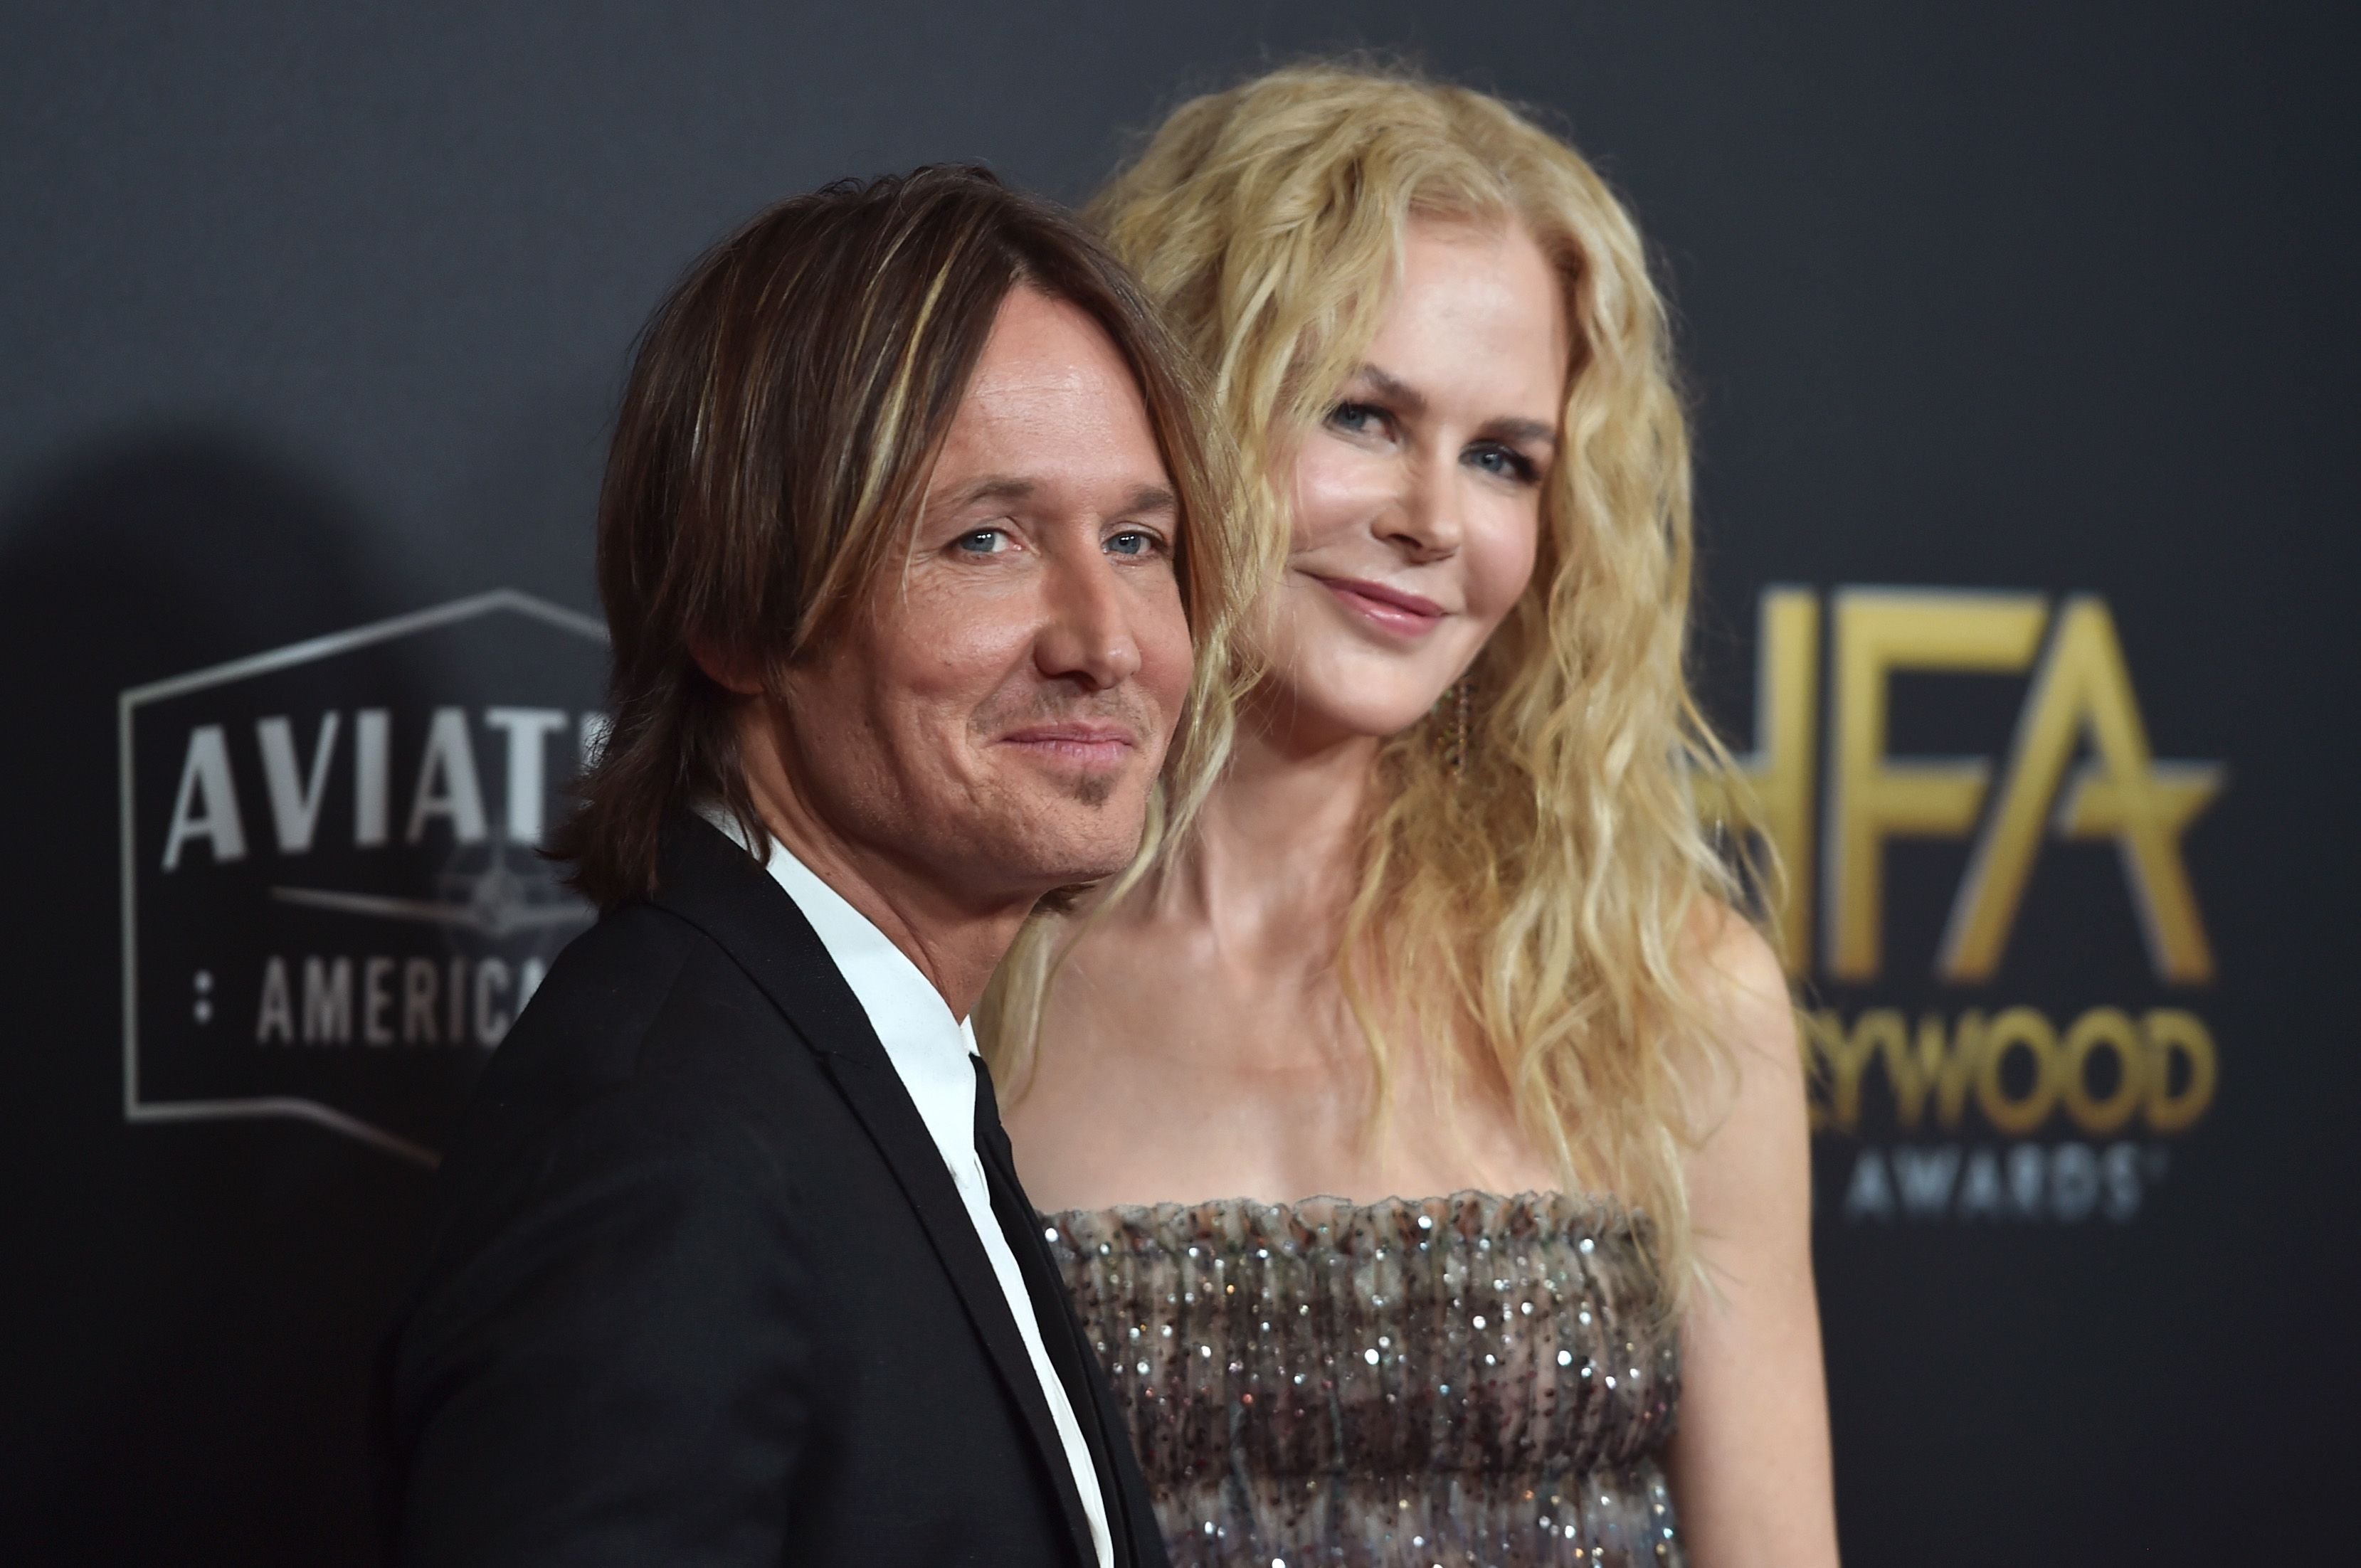 Keith Urban and Nicole Kidman at the 22nd Annual Hollywood Film Awards at The Beverly Hilton Hotel on November 4, 2018 | Photo: Getty Images